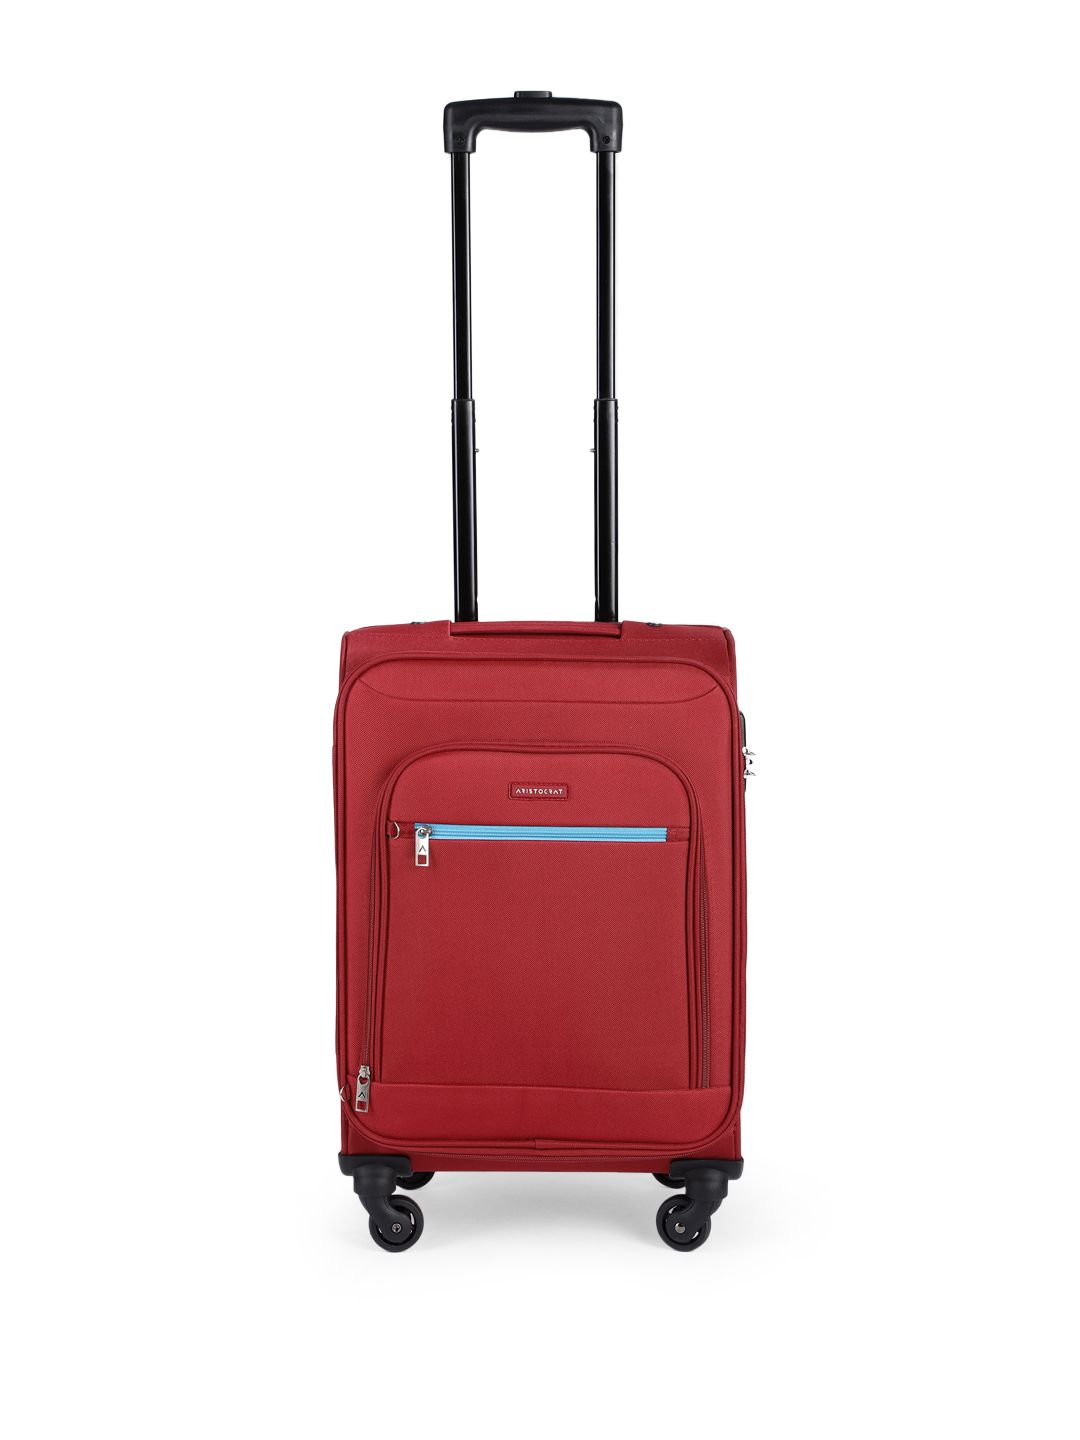 Aristocrat Bright Red Solid Nile Exp Strolly 54 Cabin Trolley Suitcase Price in India